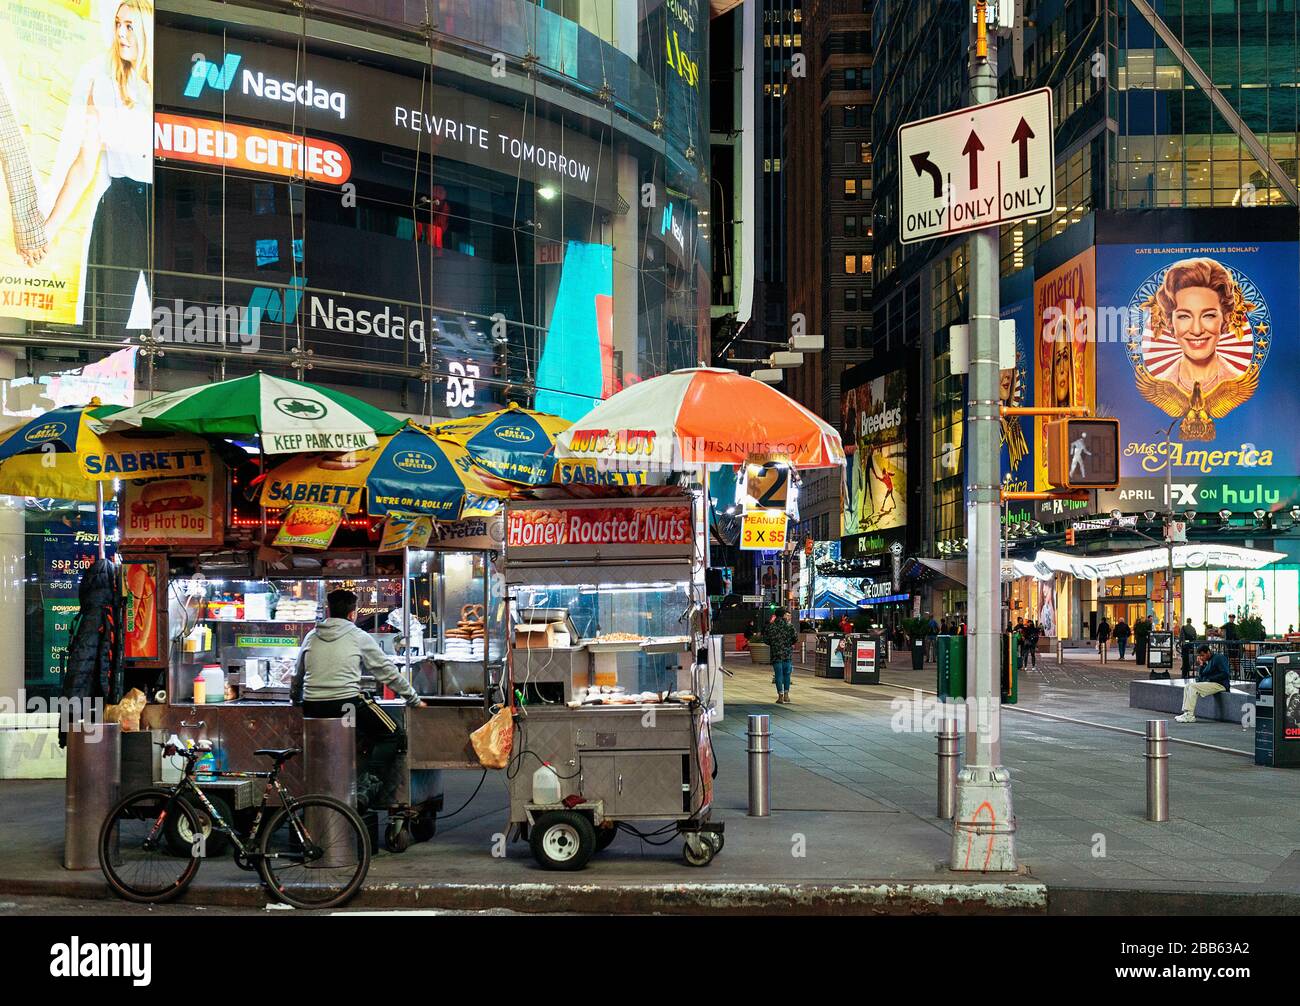 A street vendor in a deserted Times Square during rush hour and the Covid-19 Pandemic in New York City, NY. Stock Photo